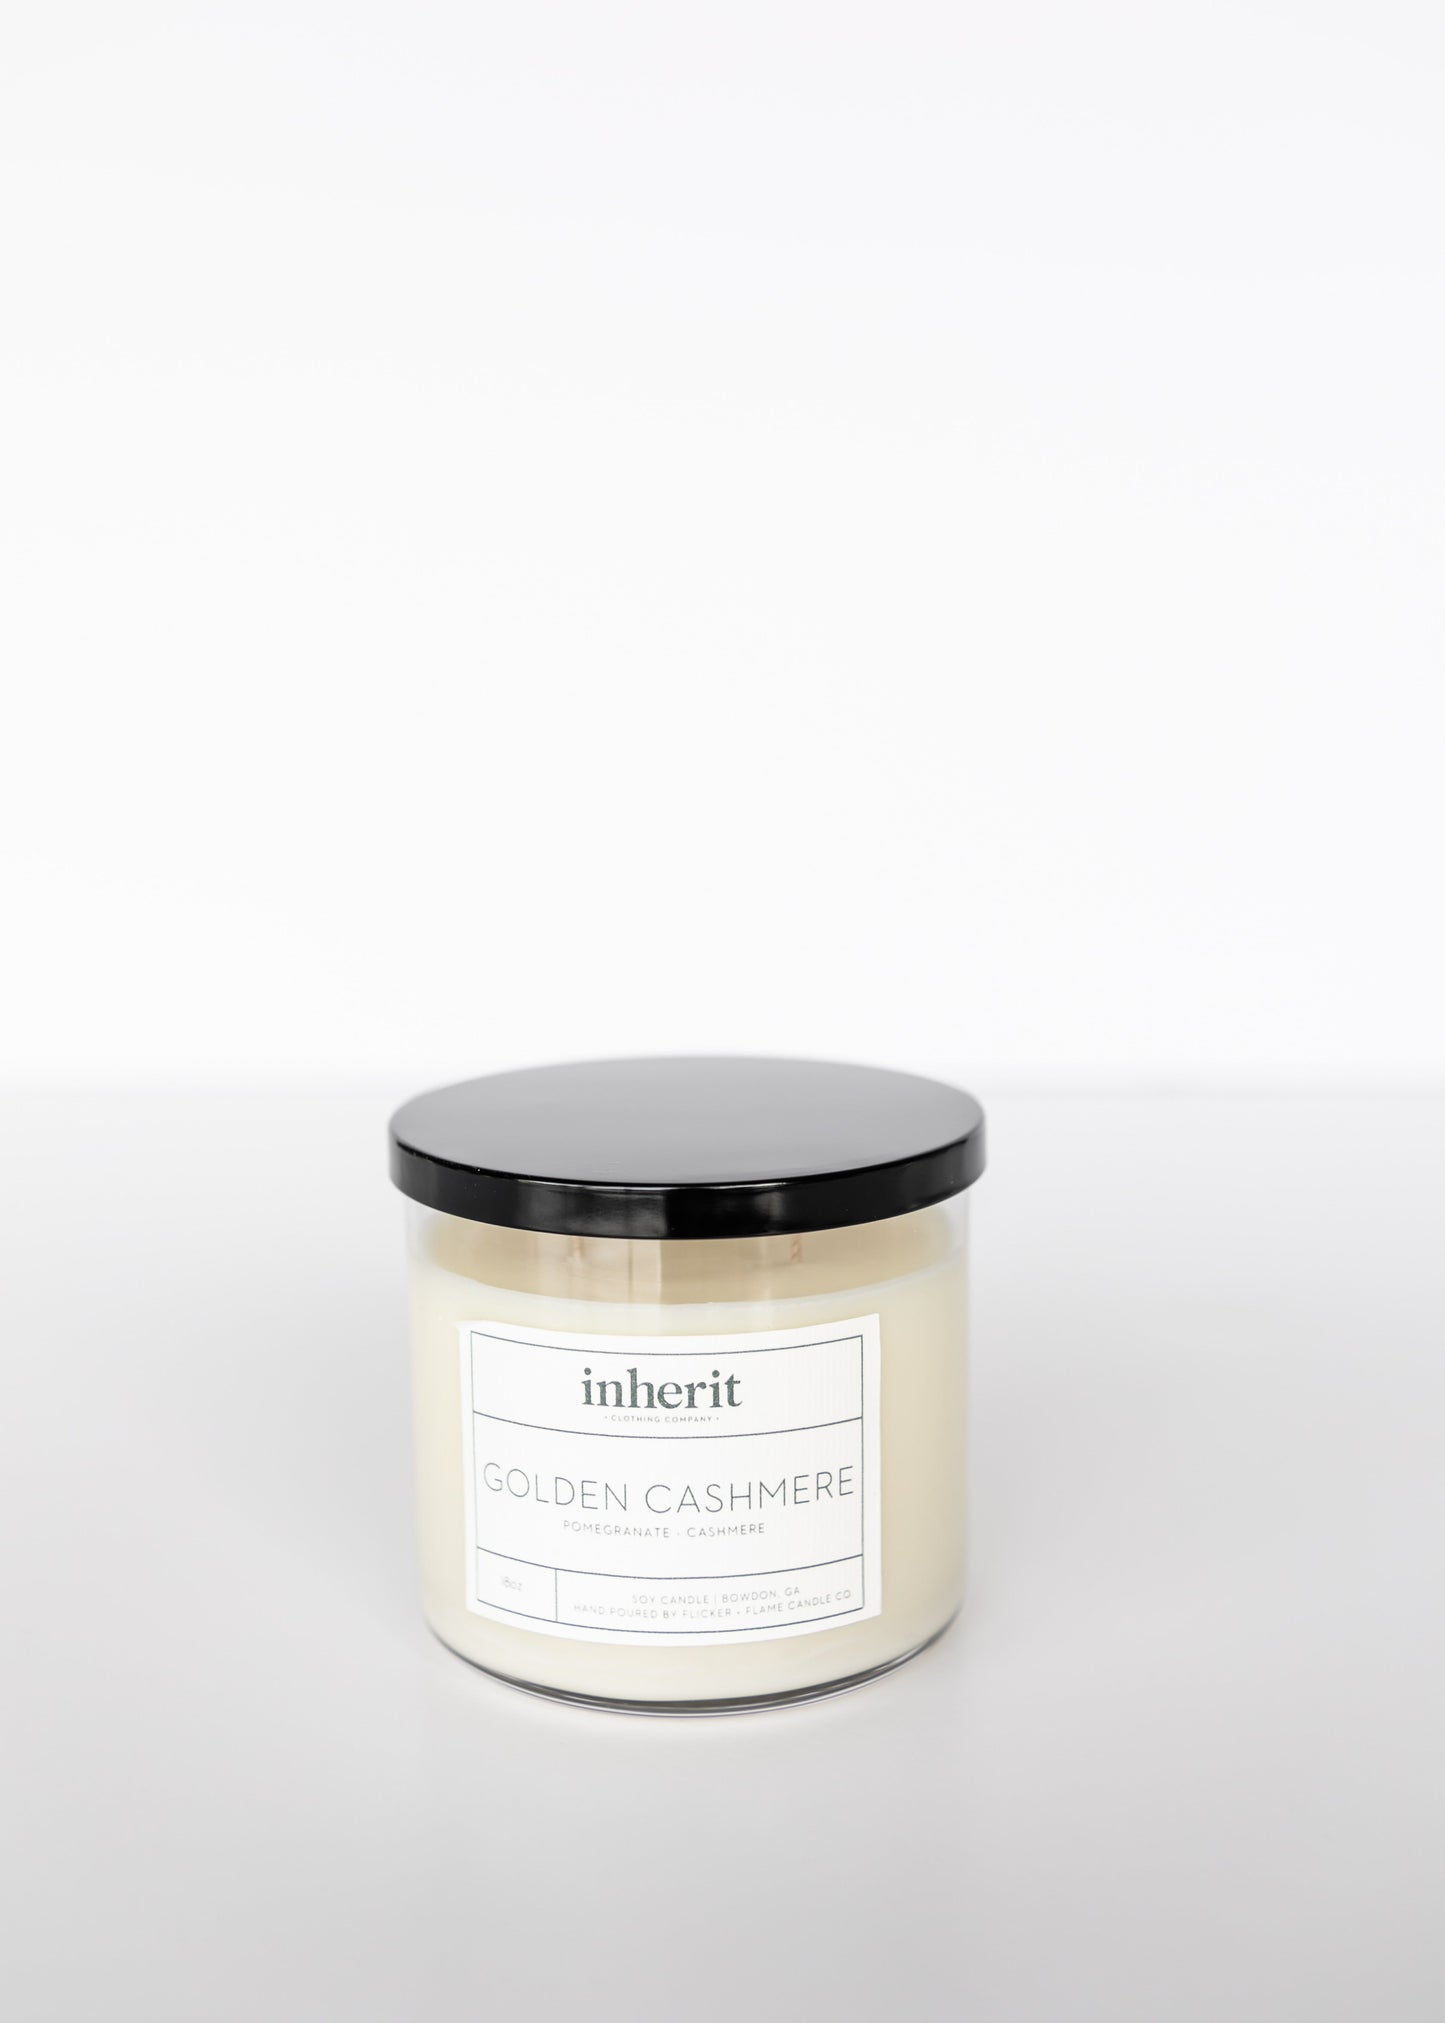 Inherit Winter Scented Soy Candle 18oz. - FINAL SALE Gifts Golden Cashmere